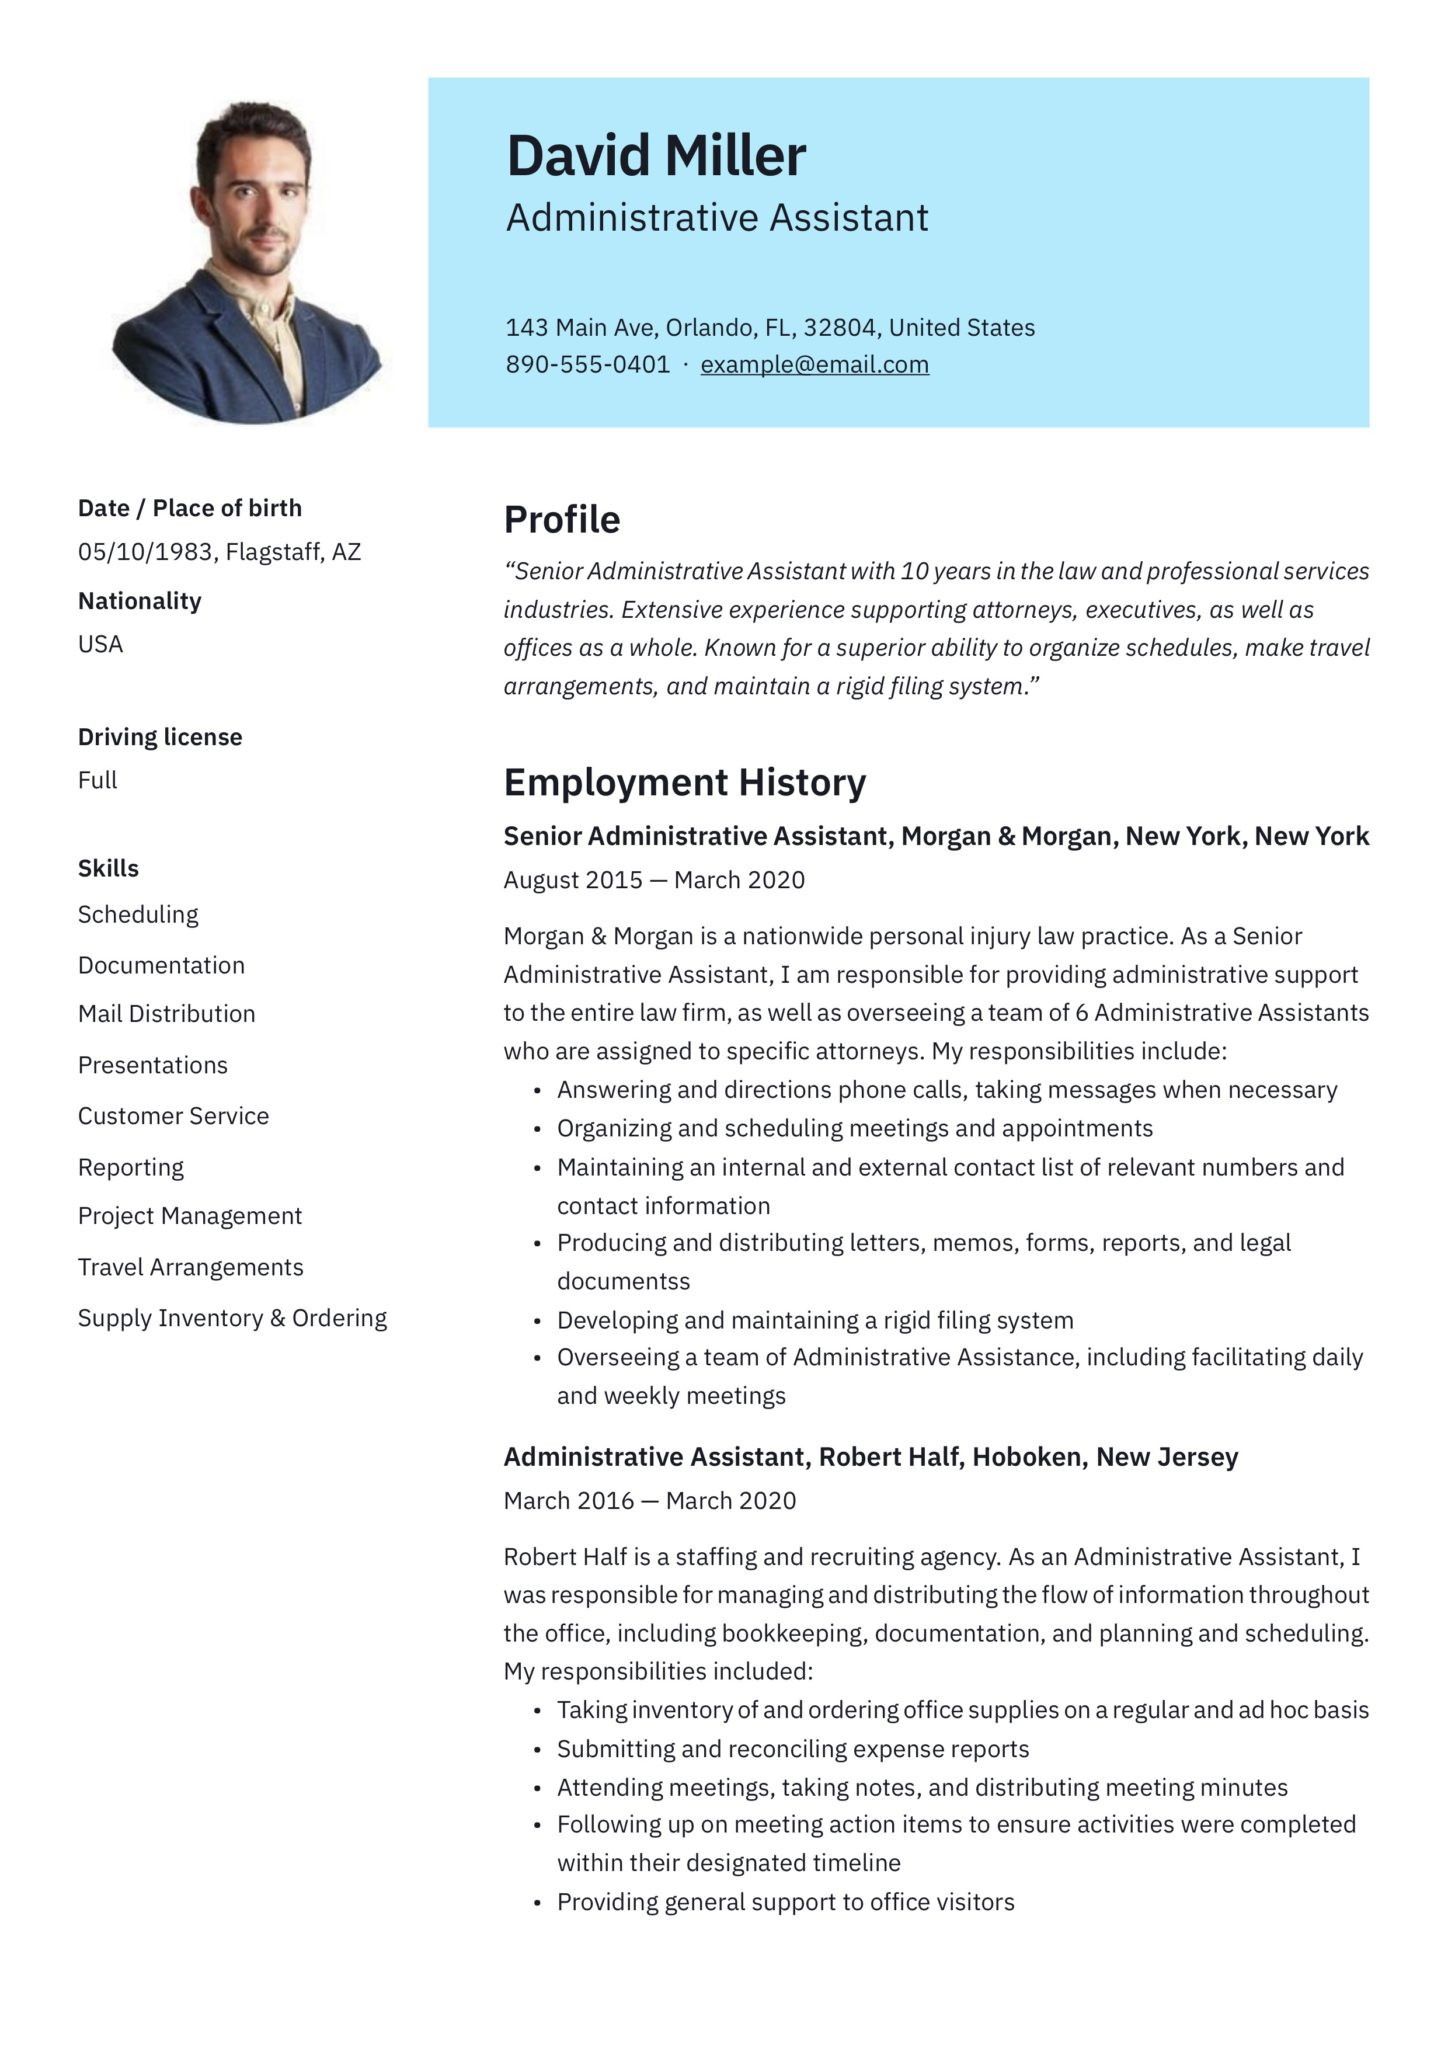 Free Sample Of Resume for Administrative assistant 19 Administrative assistant Resumes & Guide Pdf 2022